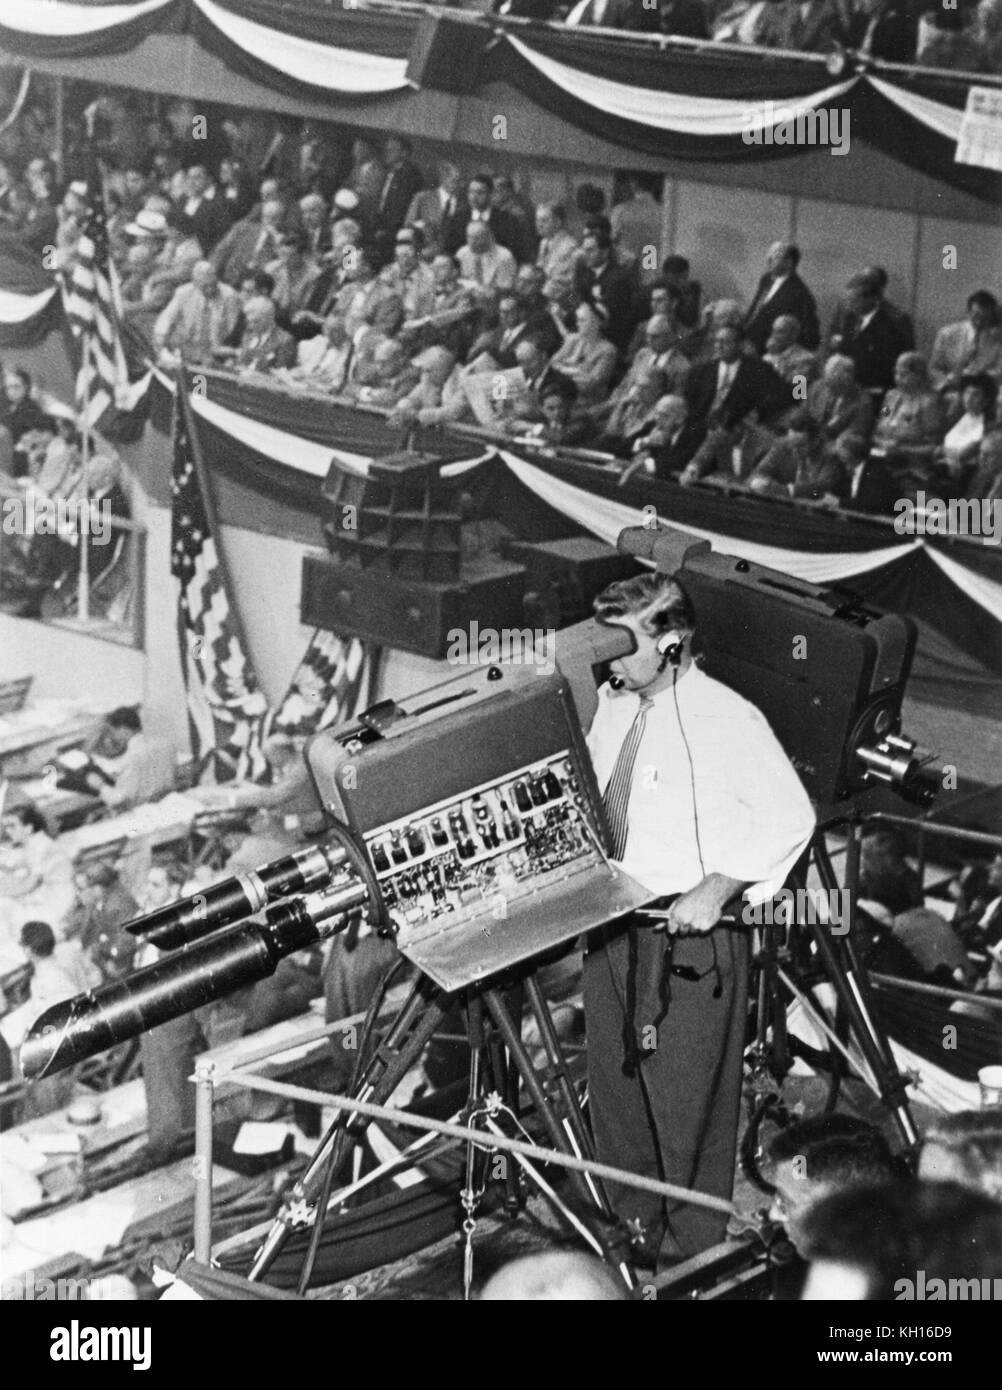 Seventy-seven television cameras covered working delegates at the 1952 Democratic National Convention held at the International Amphitheatre, Chicago, IL, 07/1952. Stock Photo